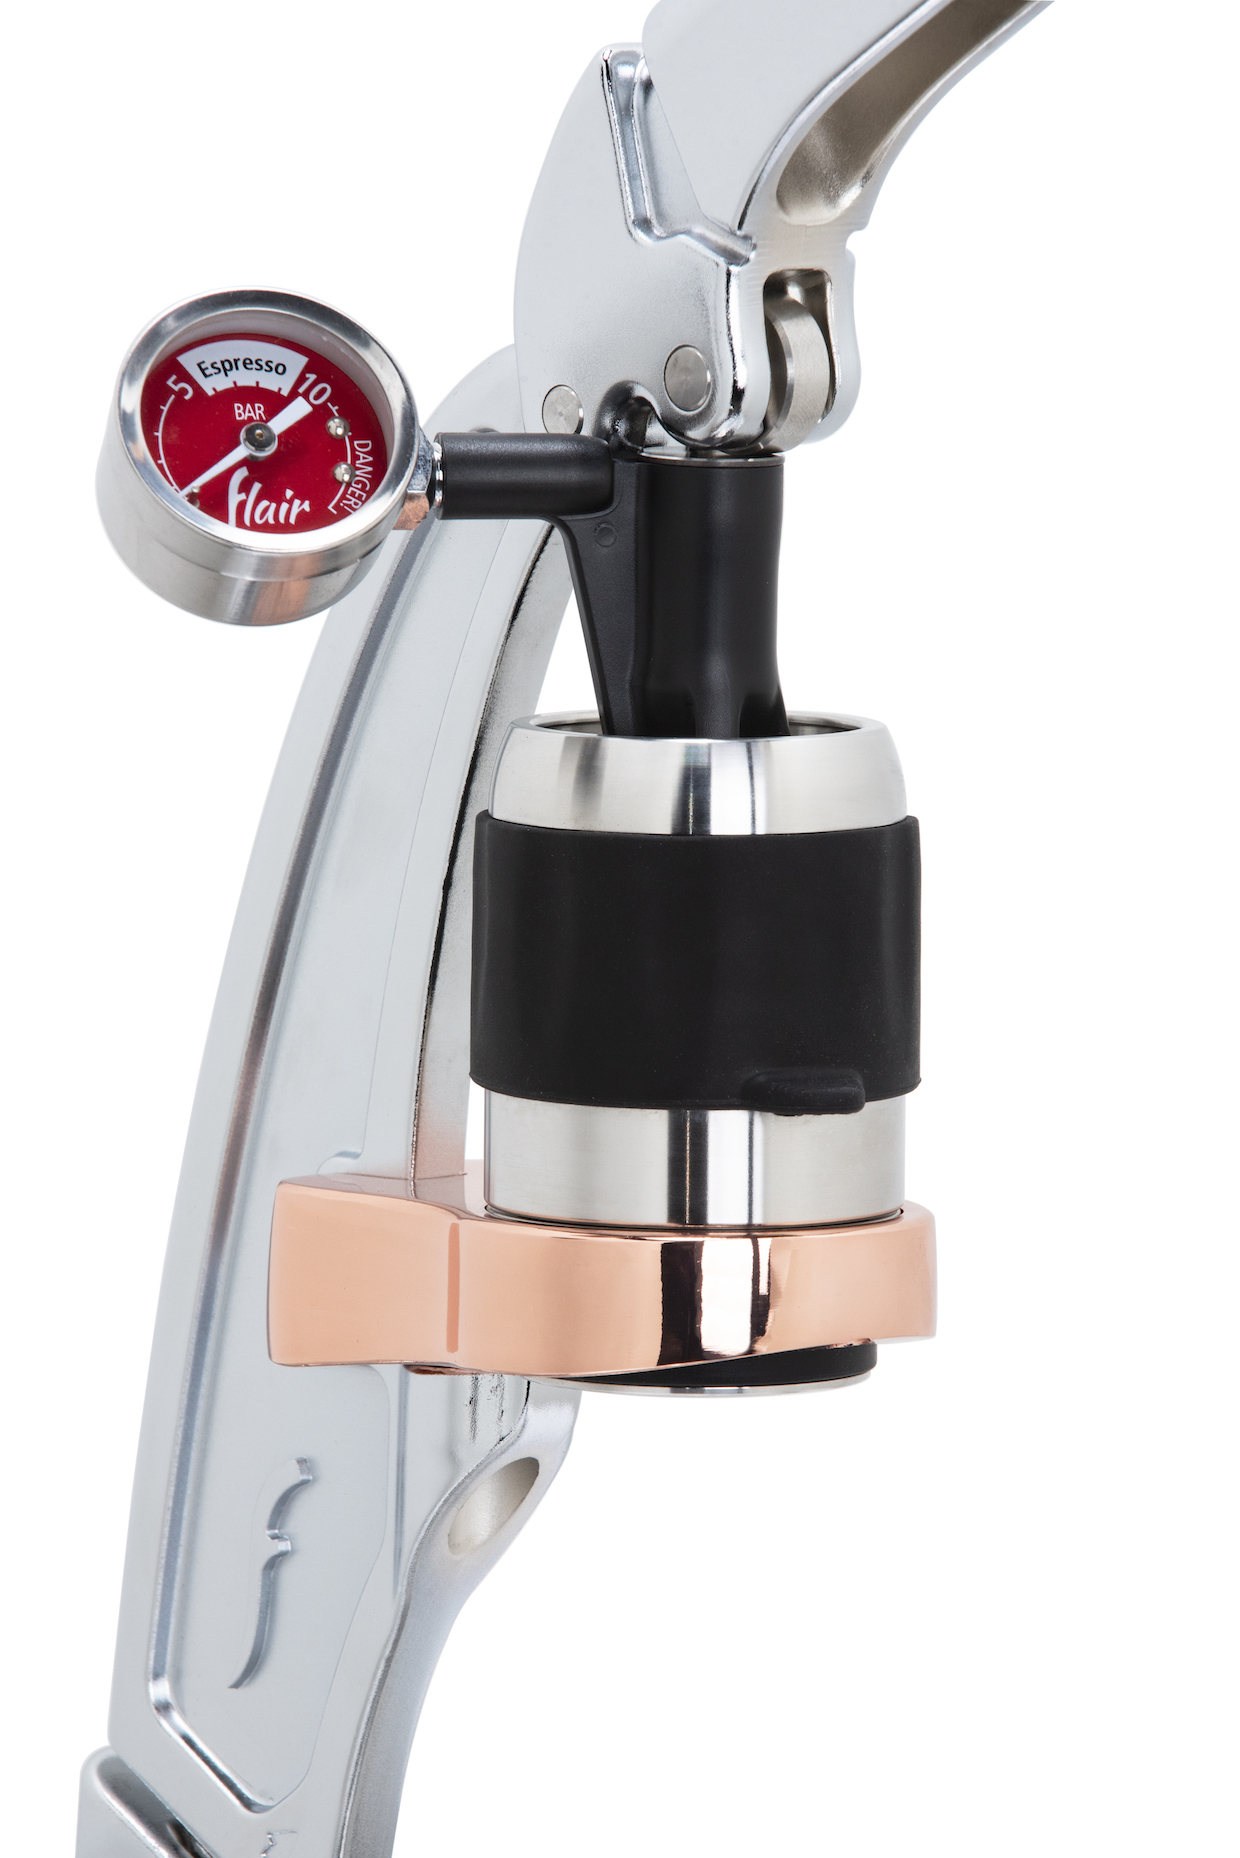 Flair Makes Major Reveal in Manual Espresso with the Signature 